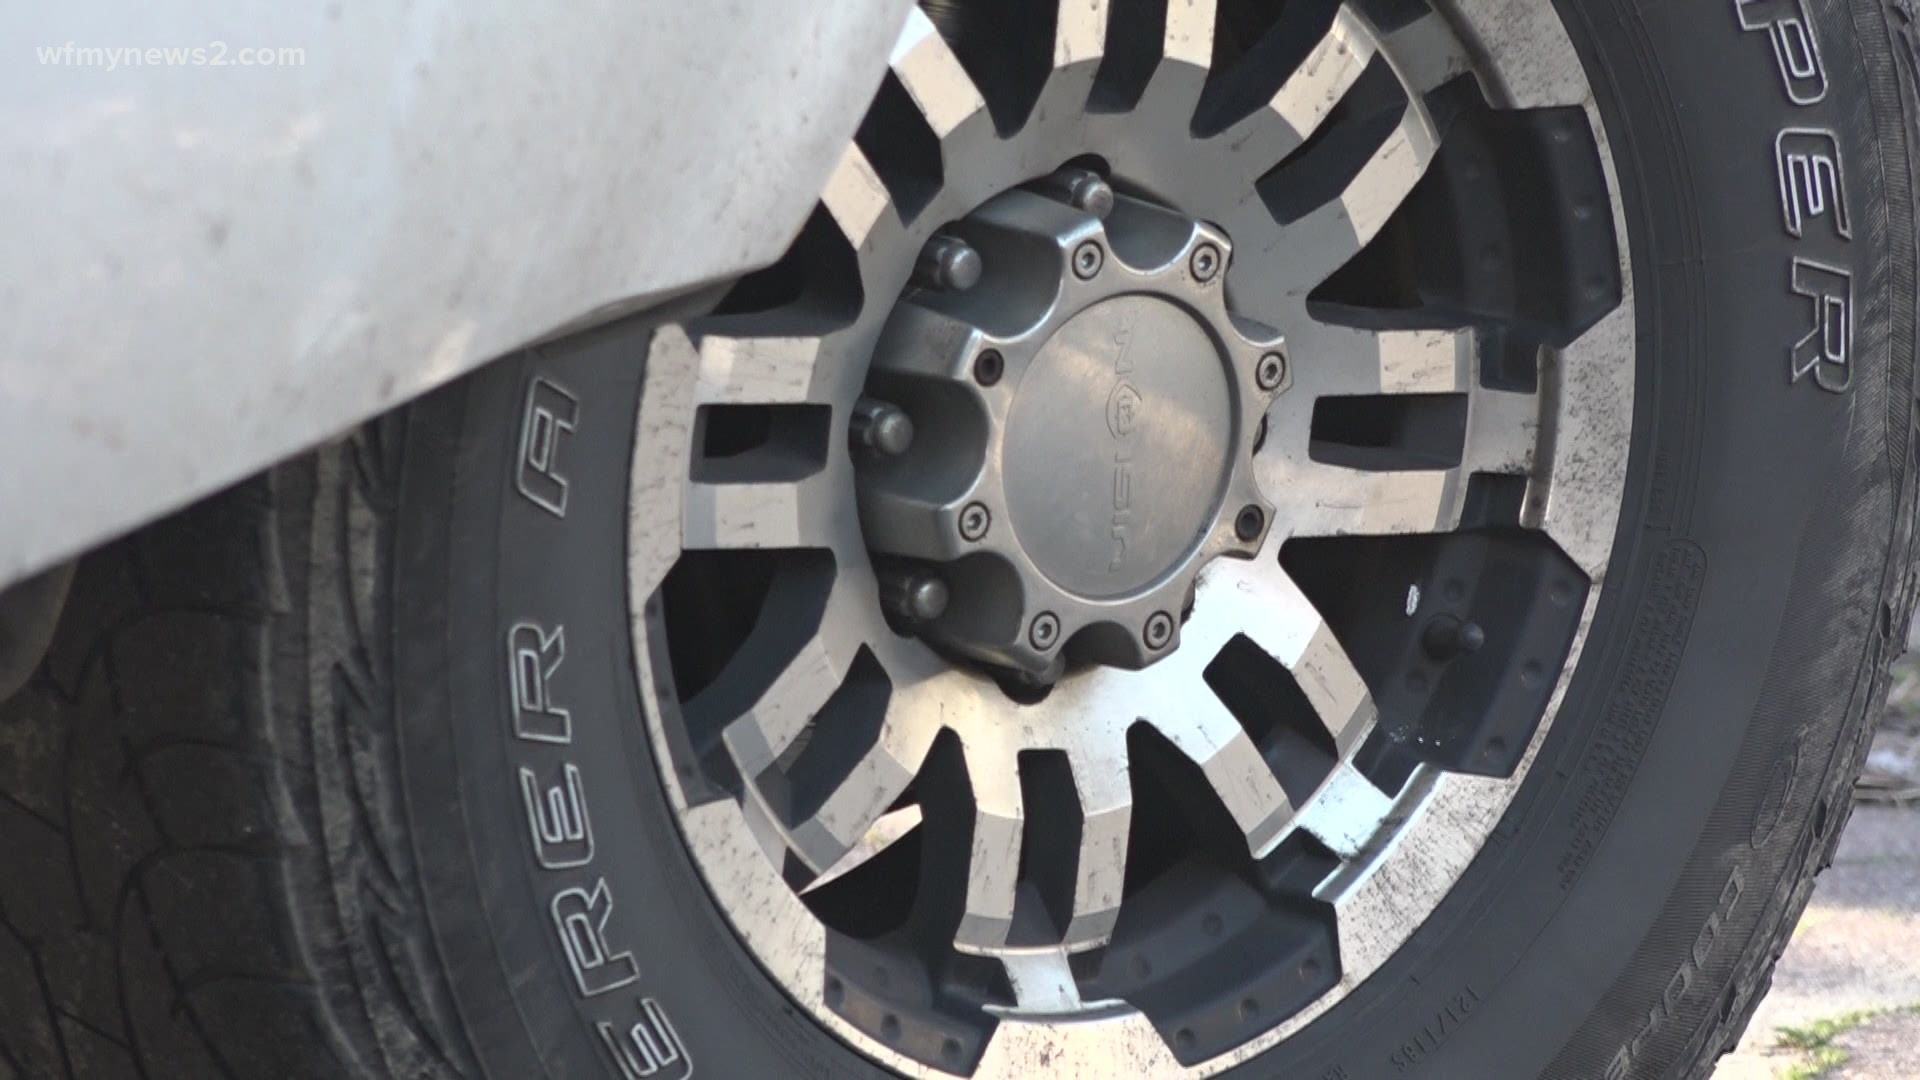 A Triad woman went to get her car's transmission fixed. She thought her insurance would cover it, but her claim was denied because of an issue with her tires.